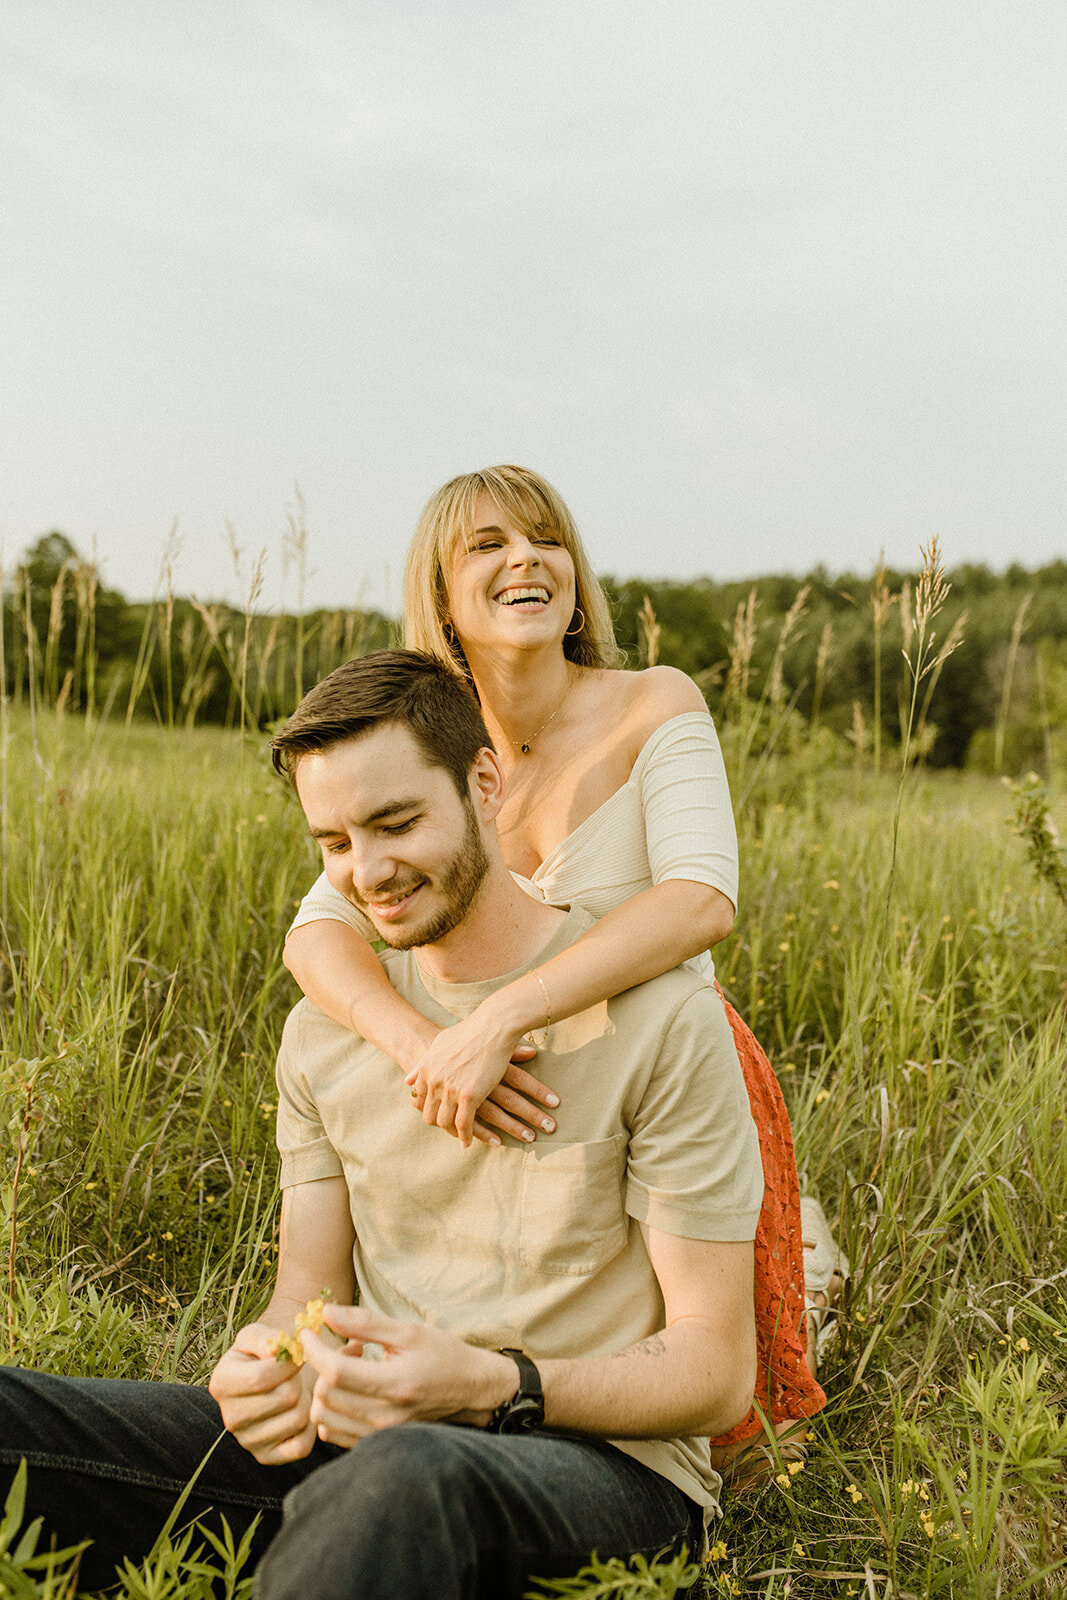 country-cut-flowers-summer-engagement-session-fun-romantic-indie-movie-wanderlust-322